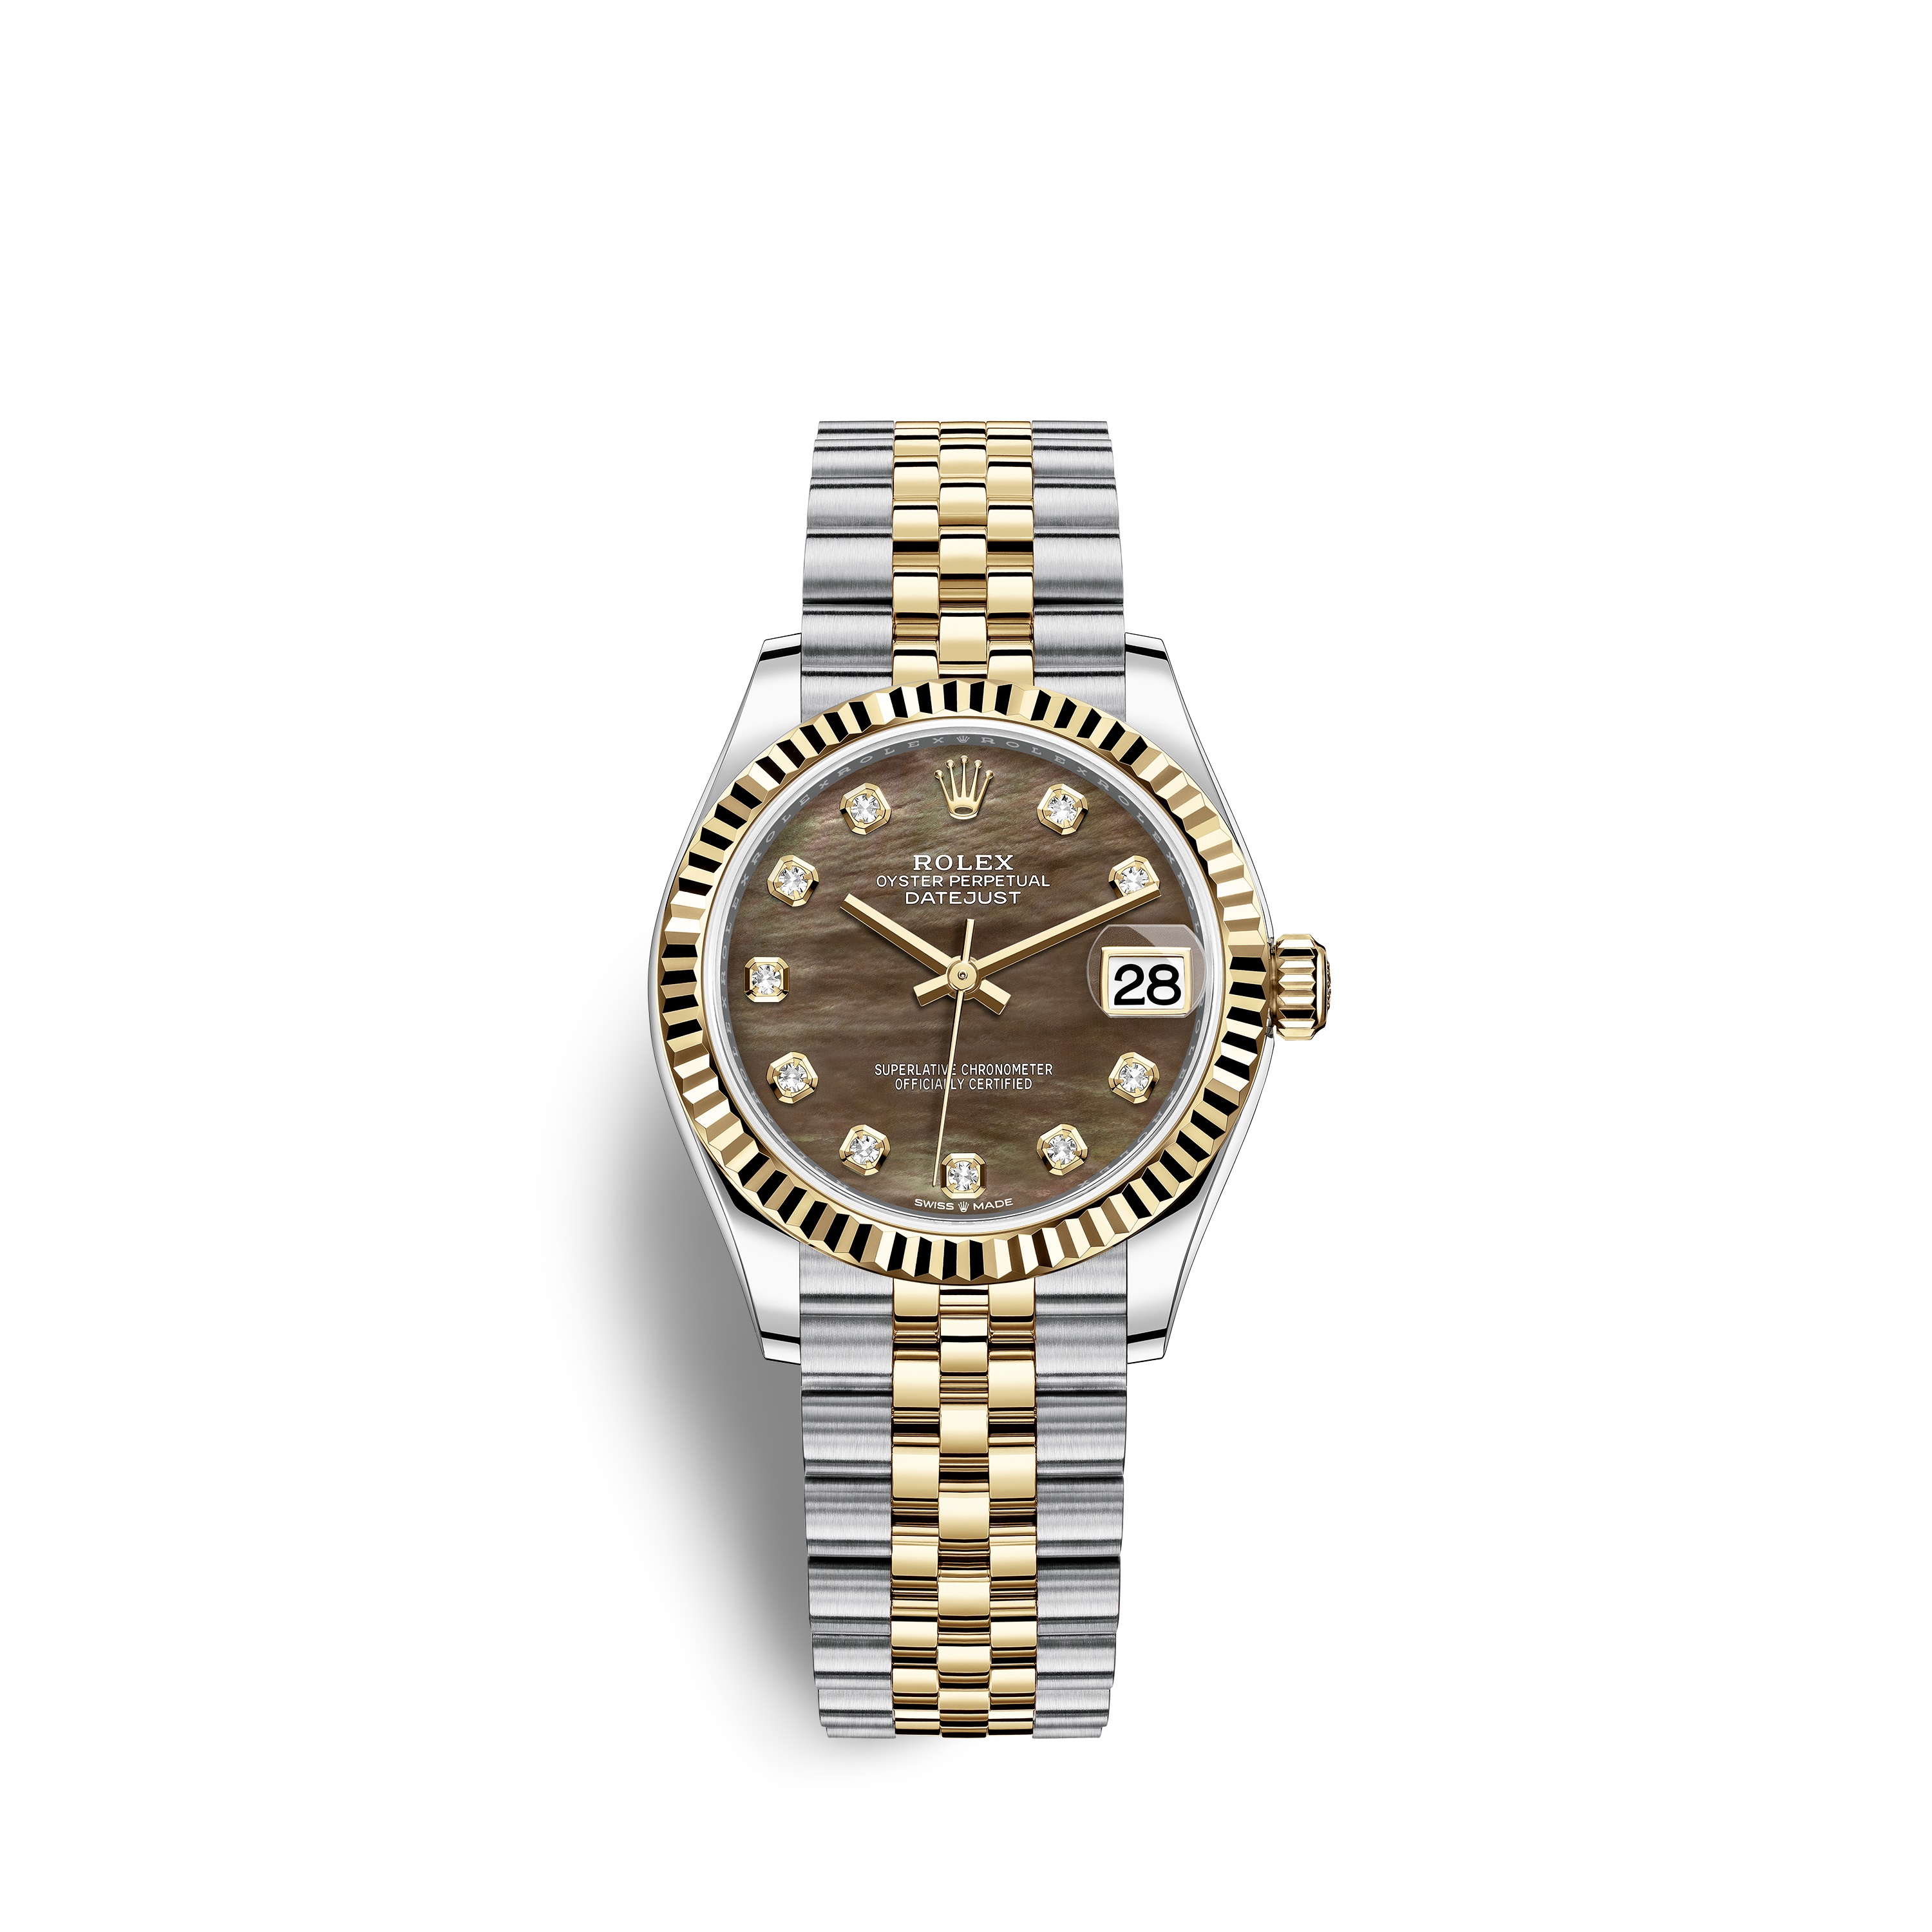 Datejust 31 278273 Gold & Stainless Steel Watch (Black Mother-of-Pearl Set with Diamonds)